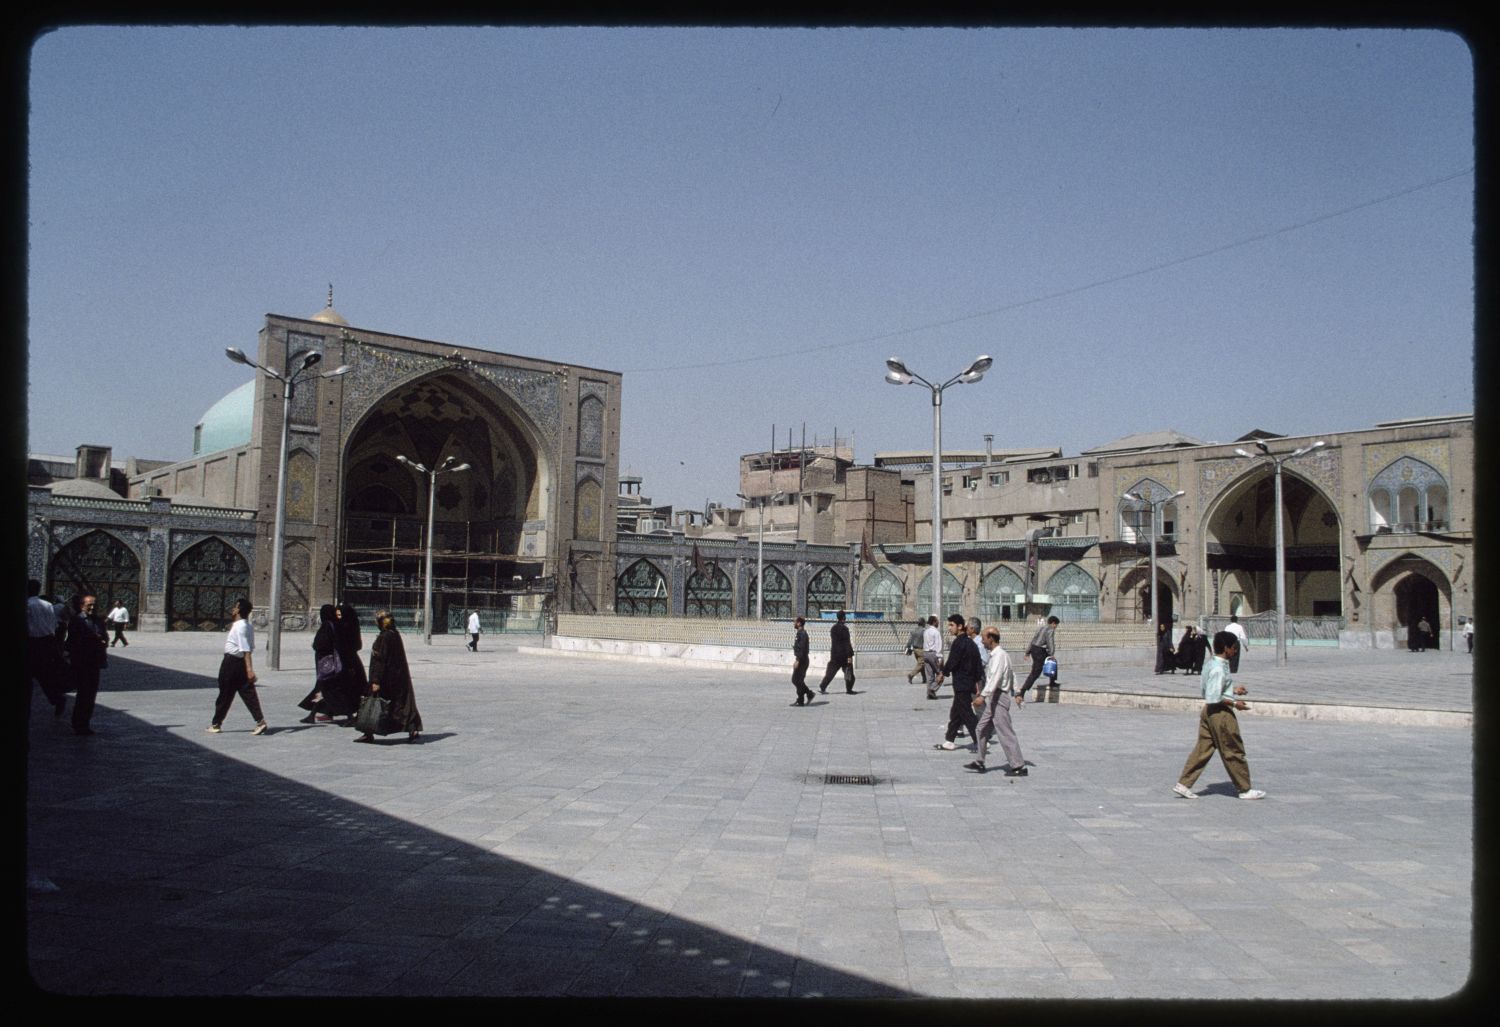 View facing south across courtyard. The qibla (southwest) iwan is visible at left.